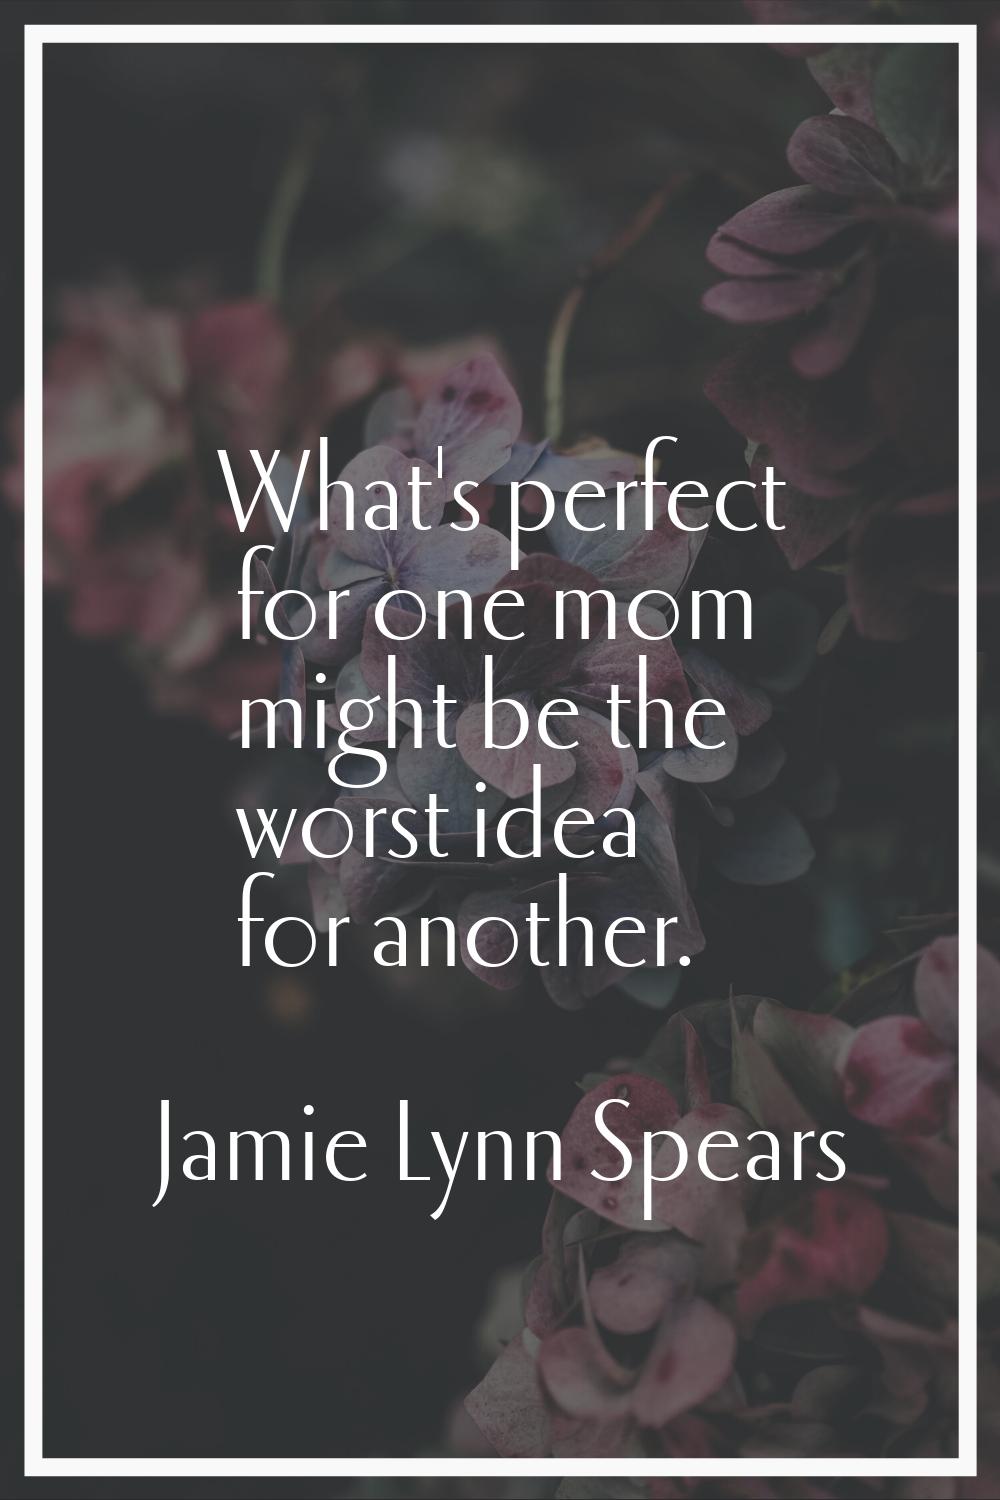 What's perfect for one mom might be the worst idea for another.